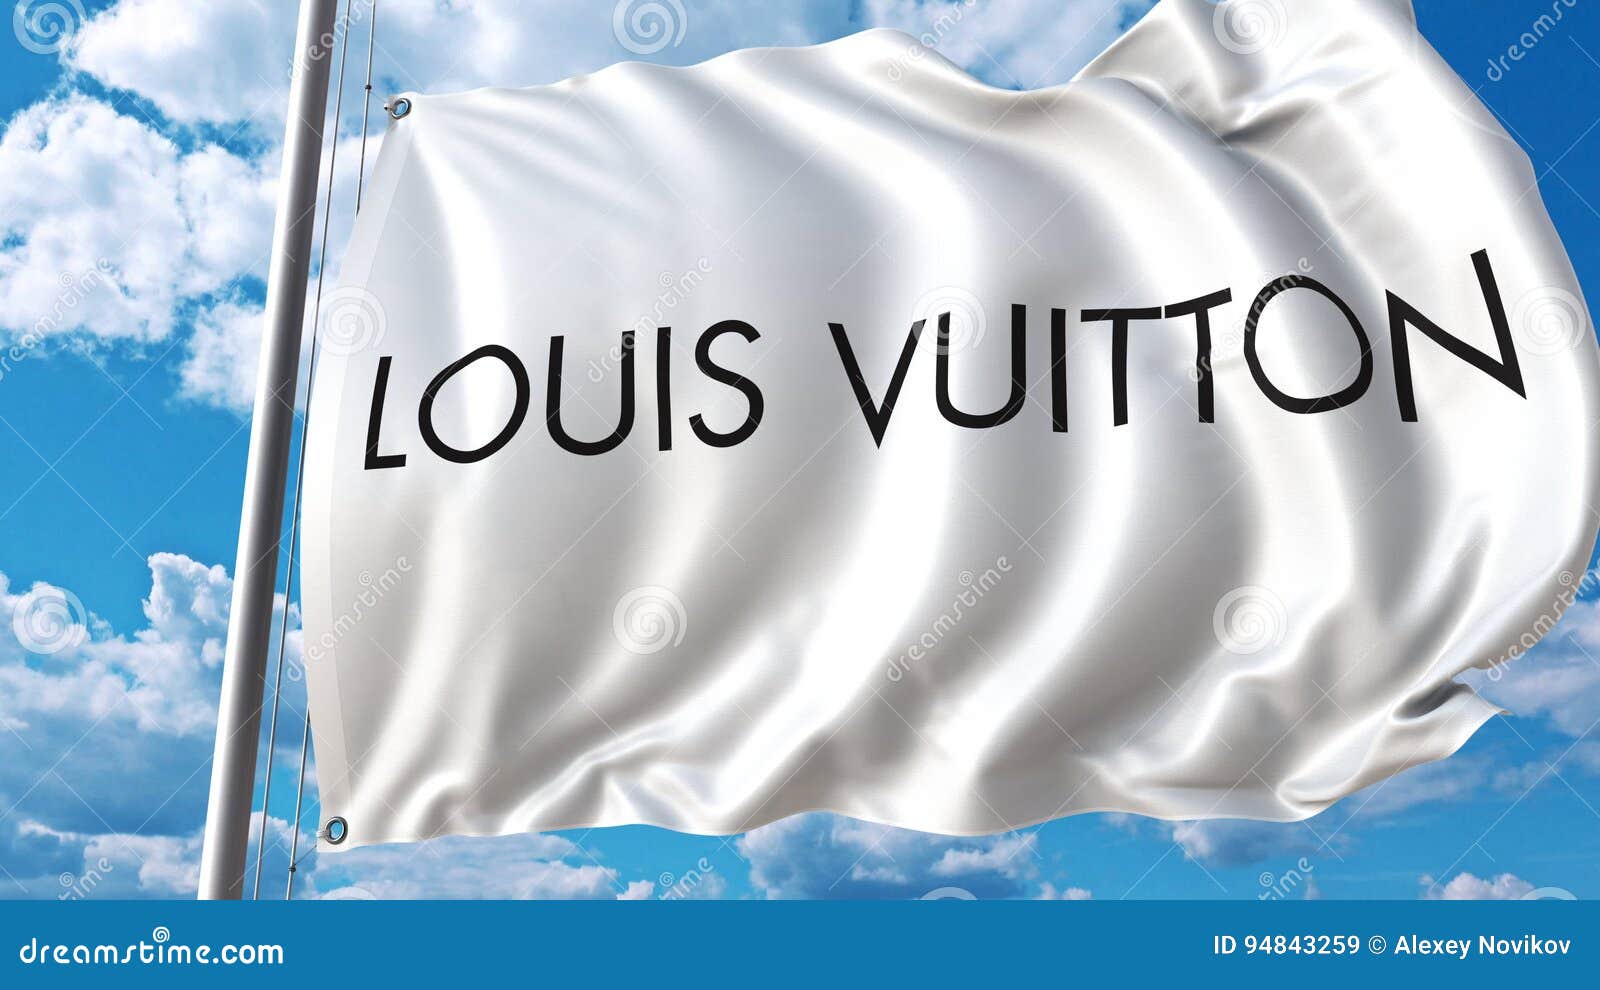 Louis Vuitton in the sky with diamonds